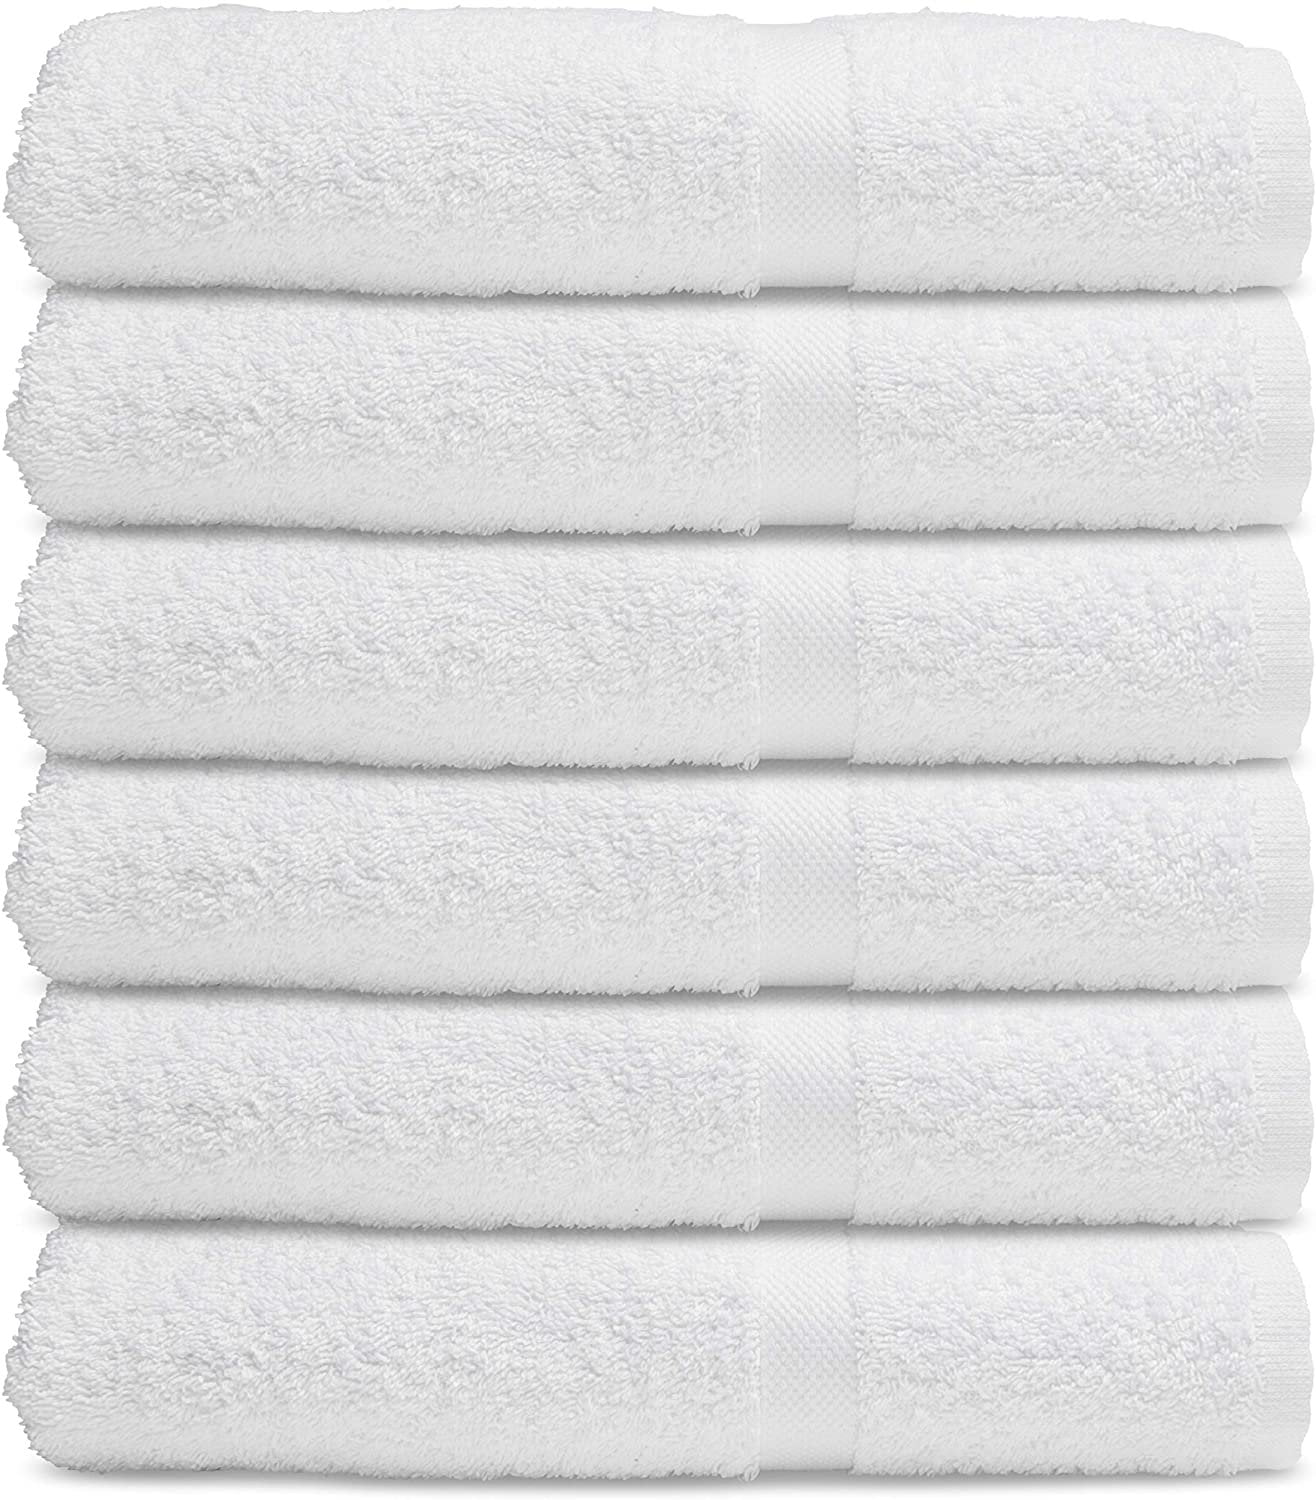 22x44 Inch Small and Lightweight 6 Pack Wh... Wealuxe Cotton Bath Towels 